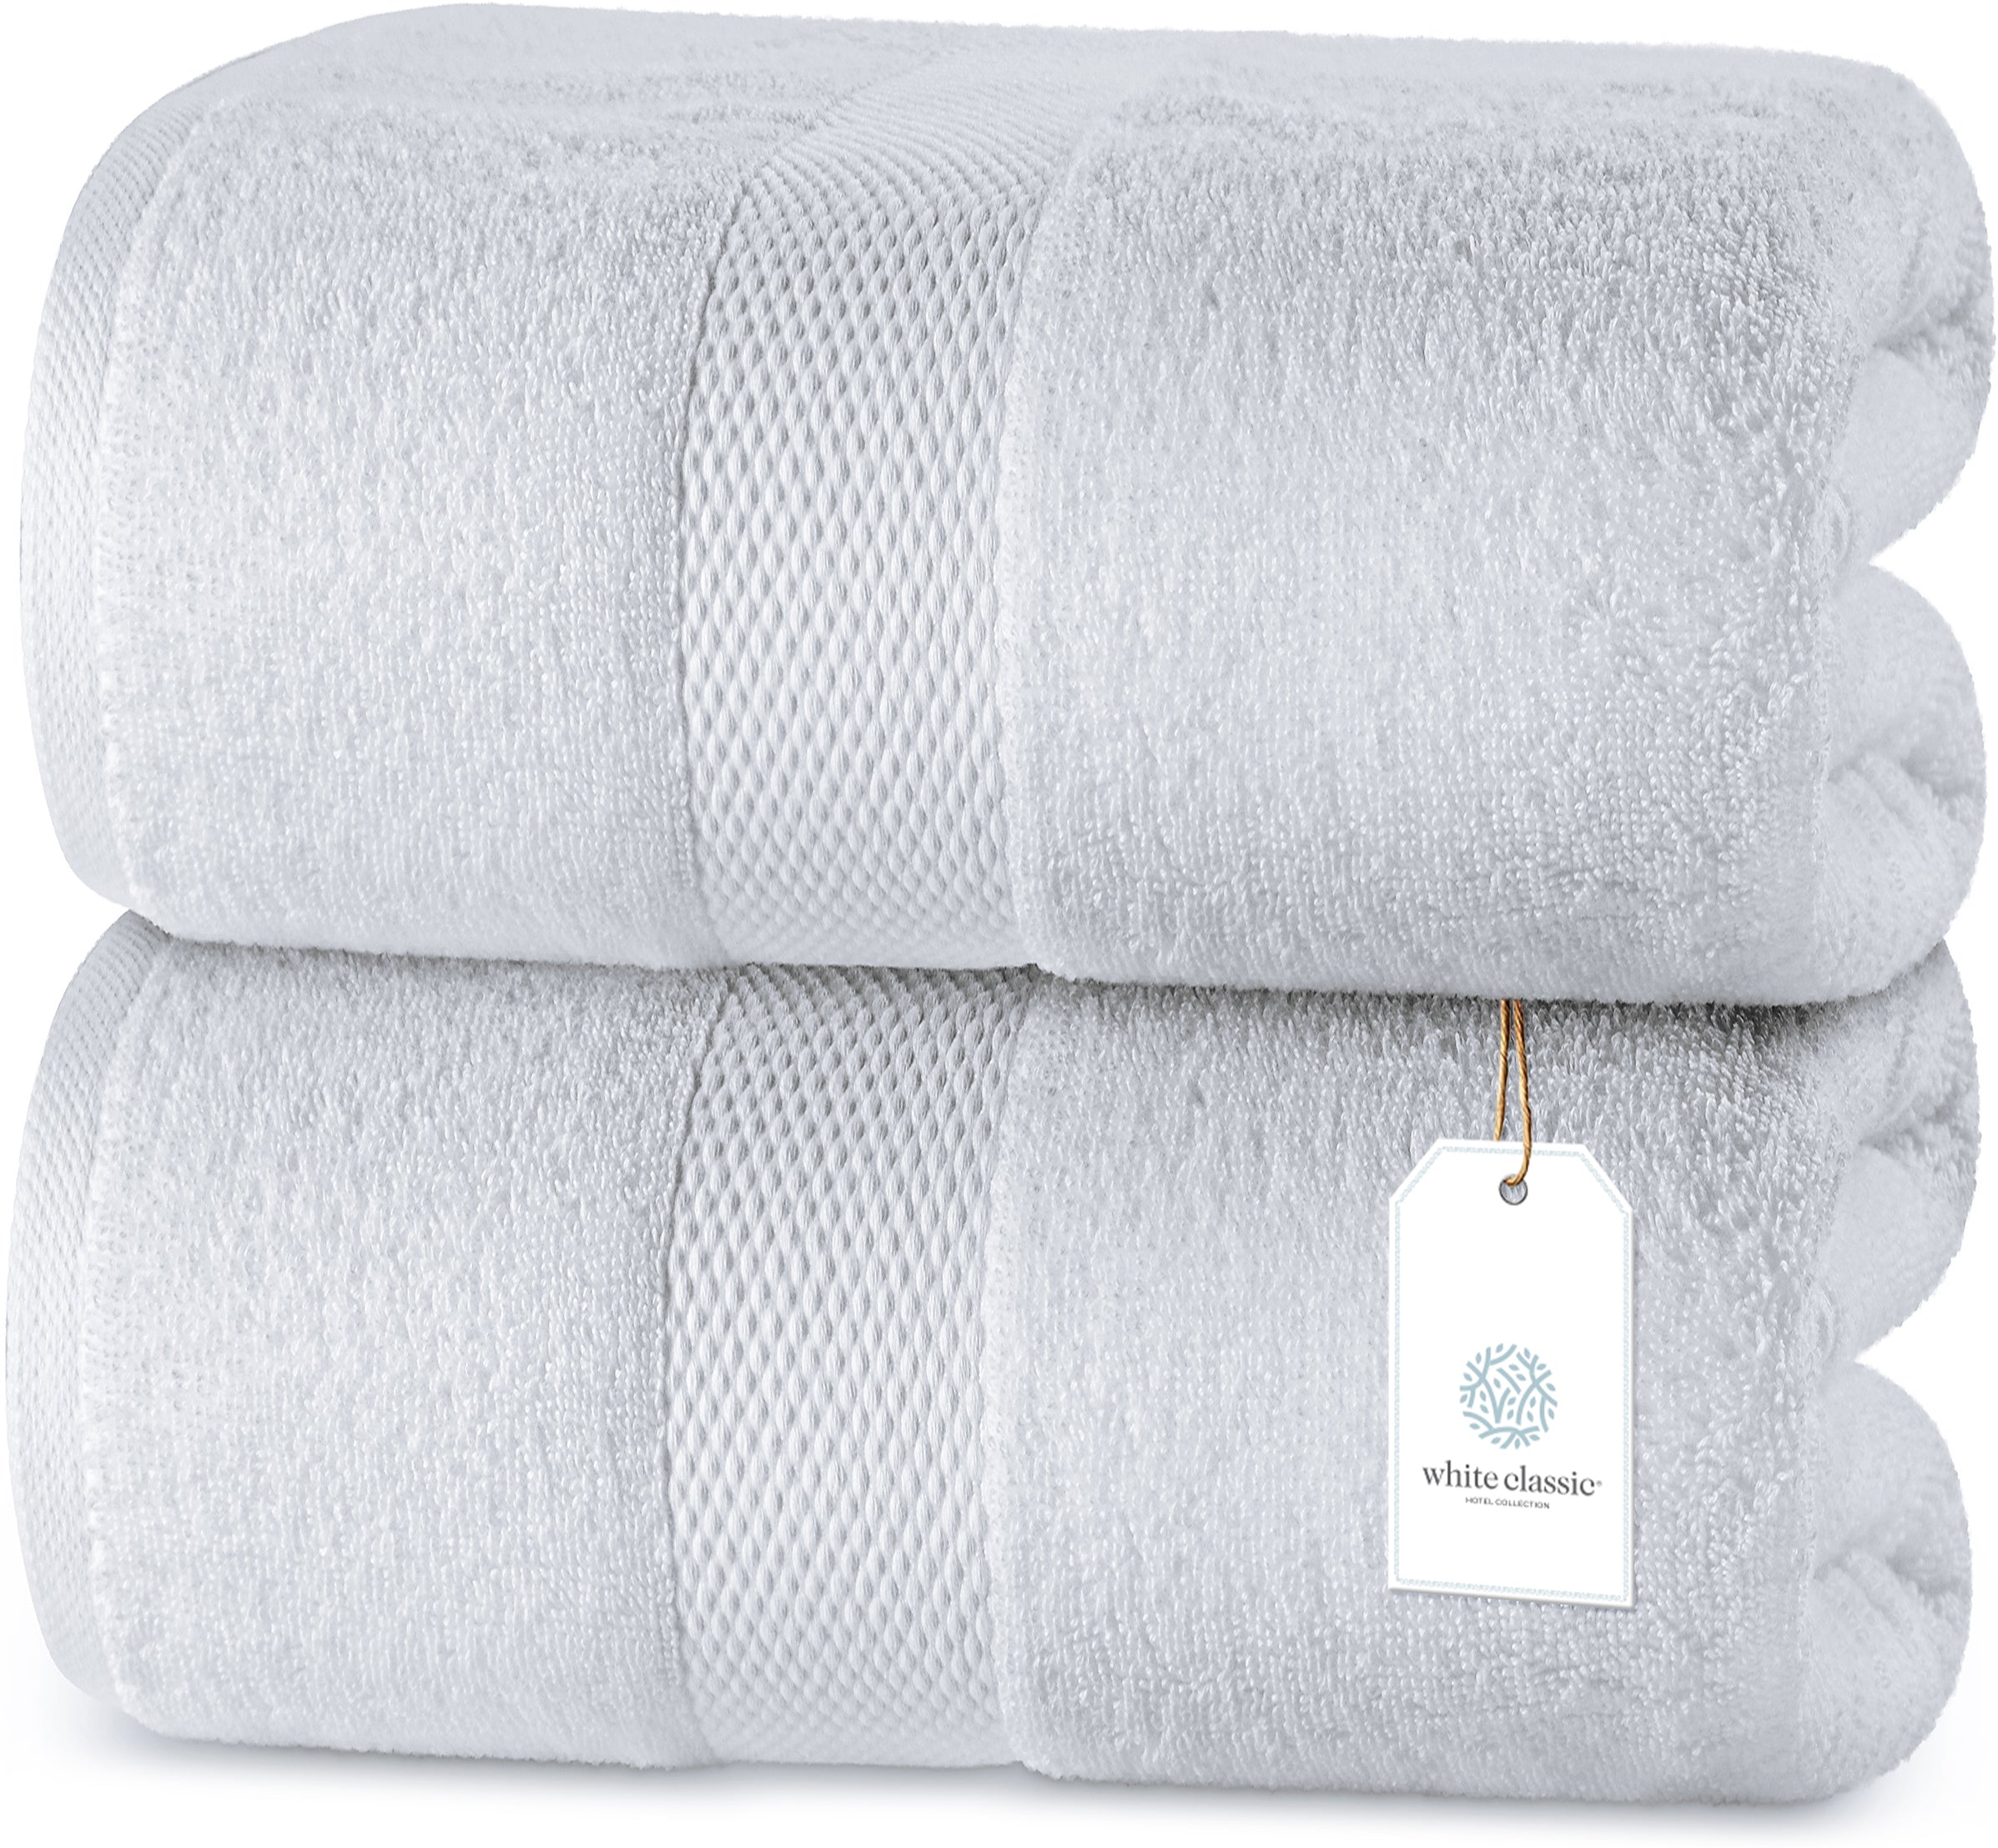 Hotel Collection Bath Sheets  12 Piece Pack – WHITE CLASSIC